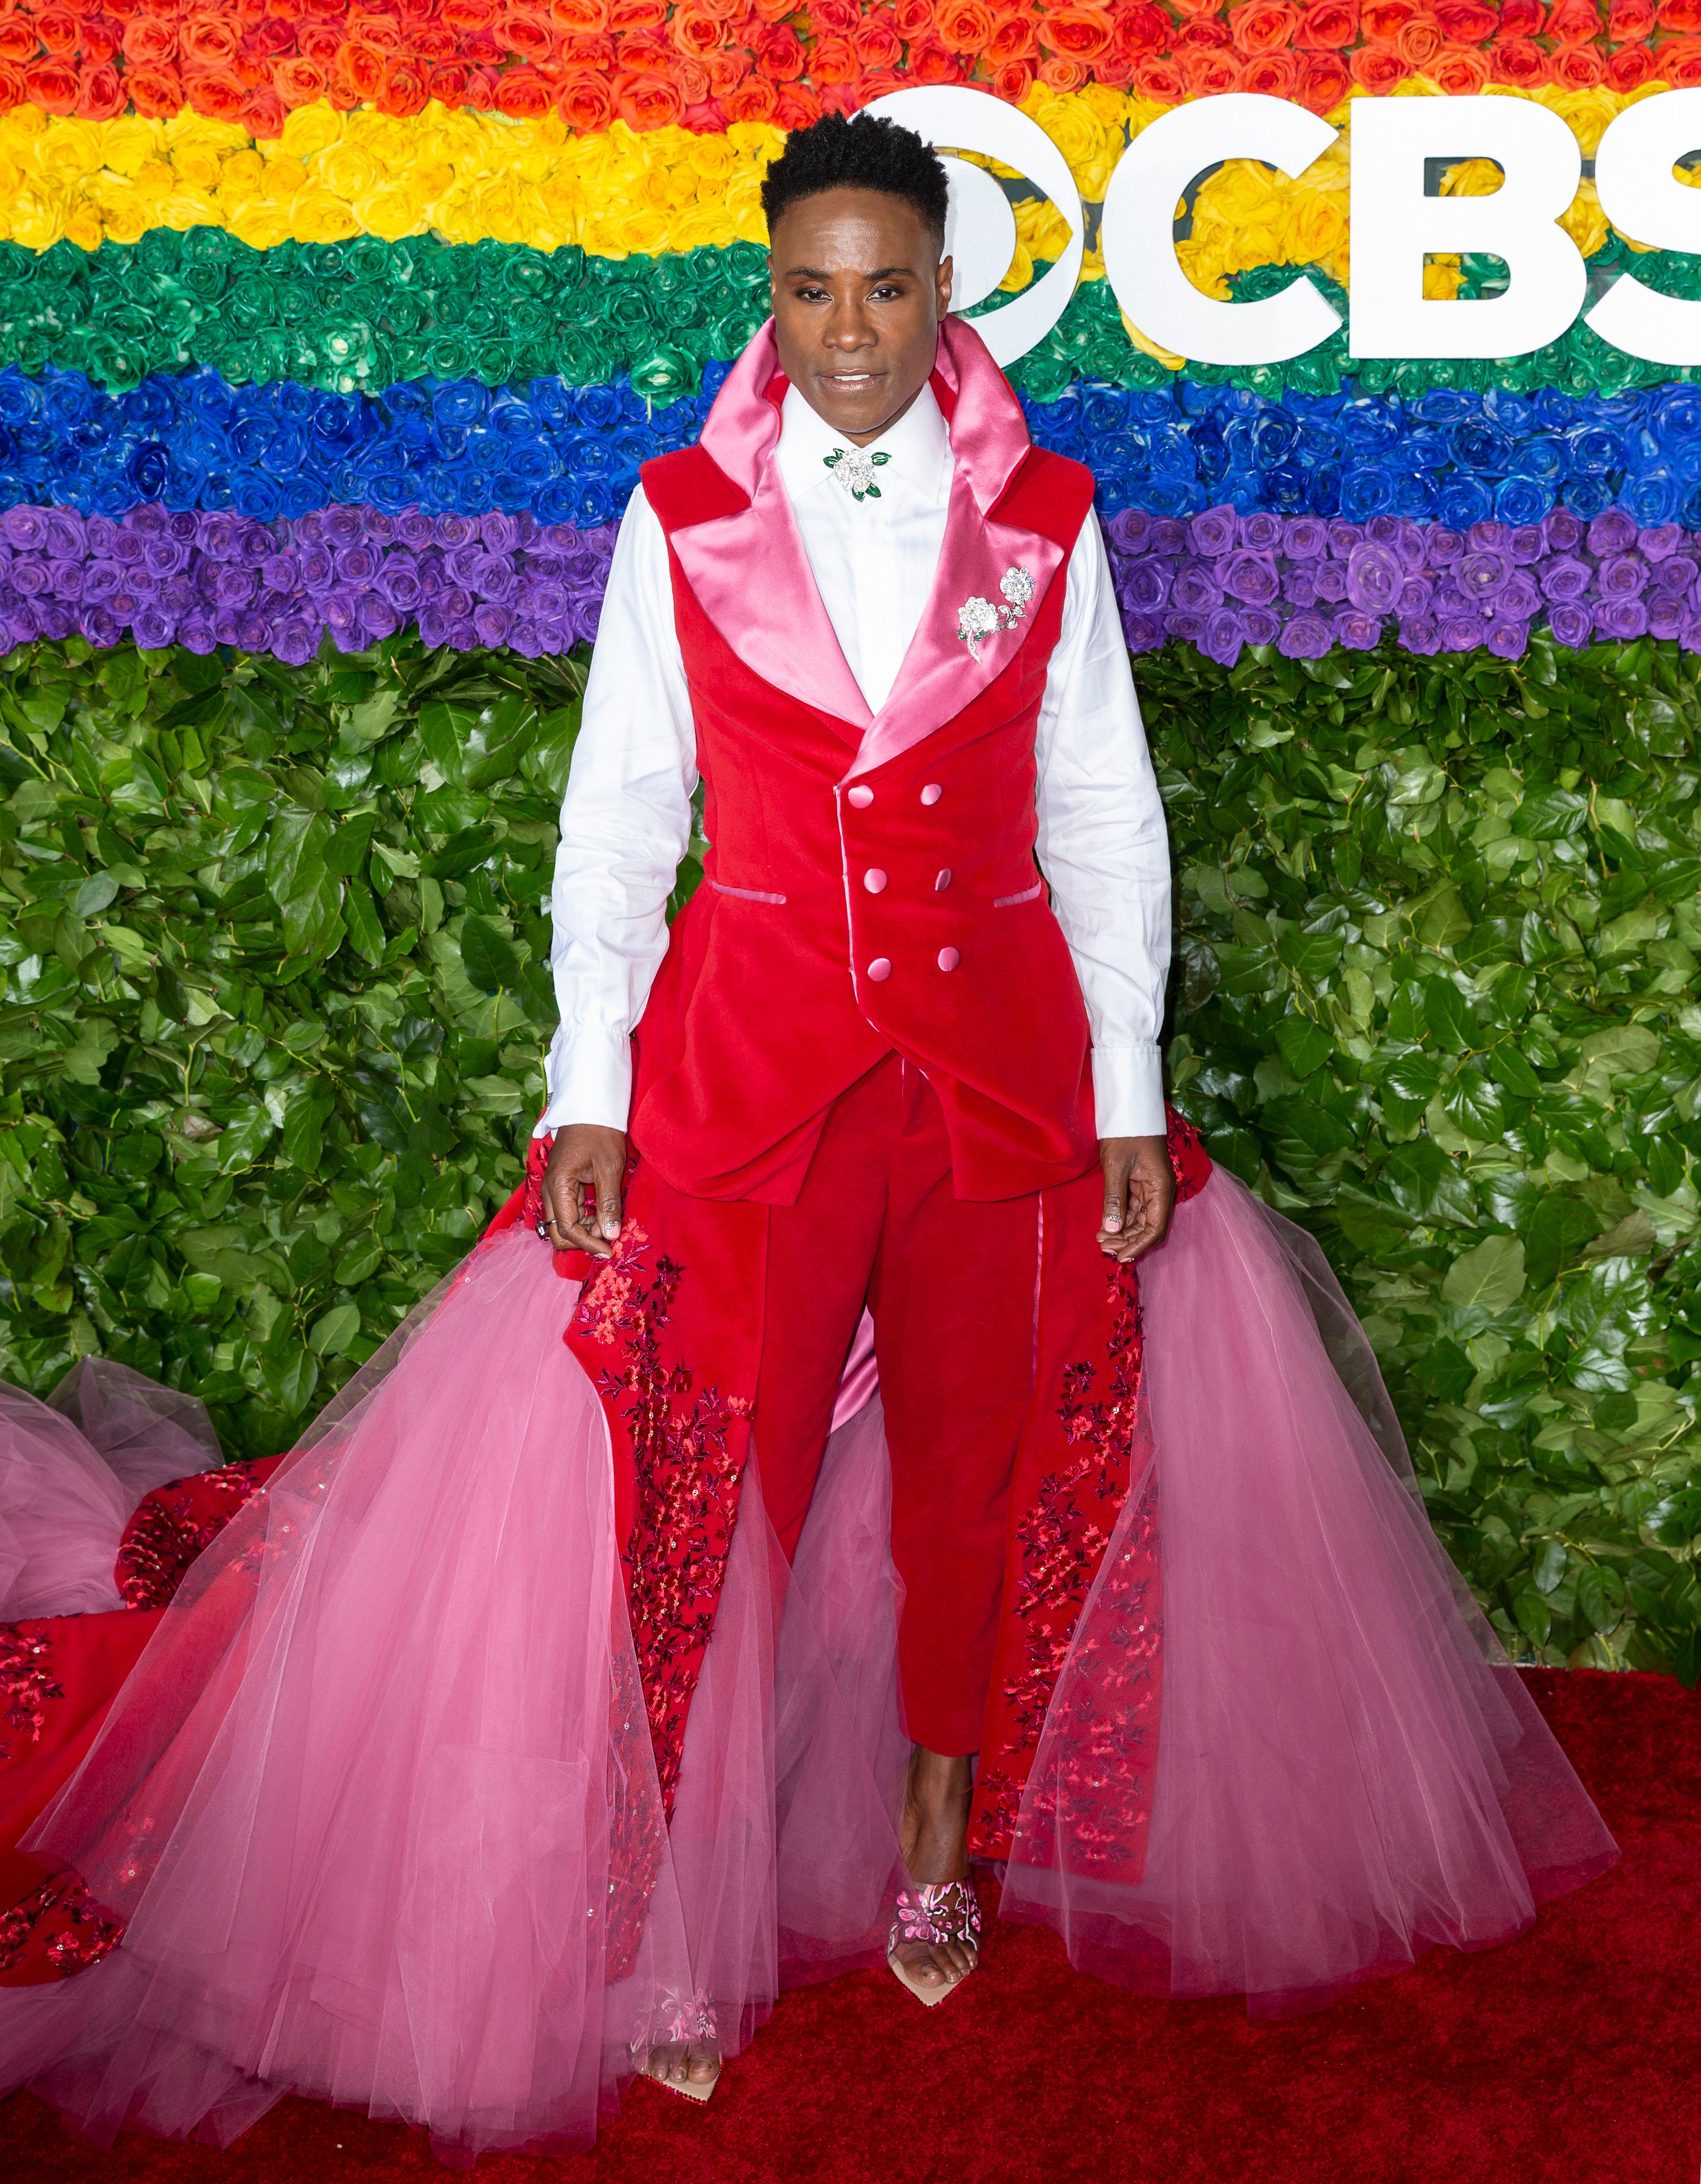 Billie Porter wears a red vest with a pink tulle skirt and heels.